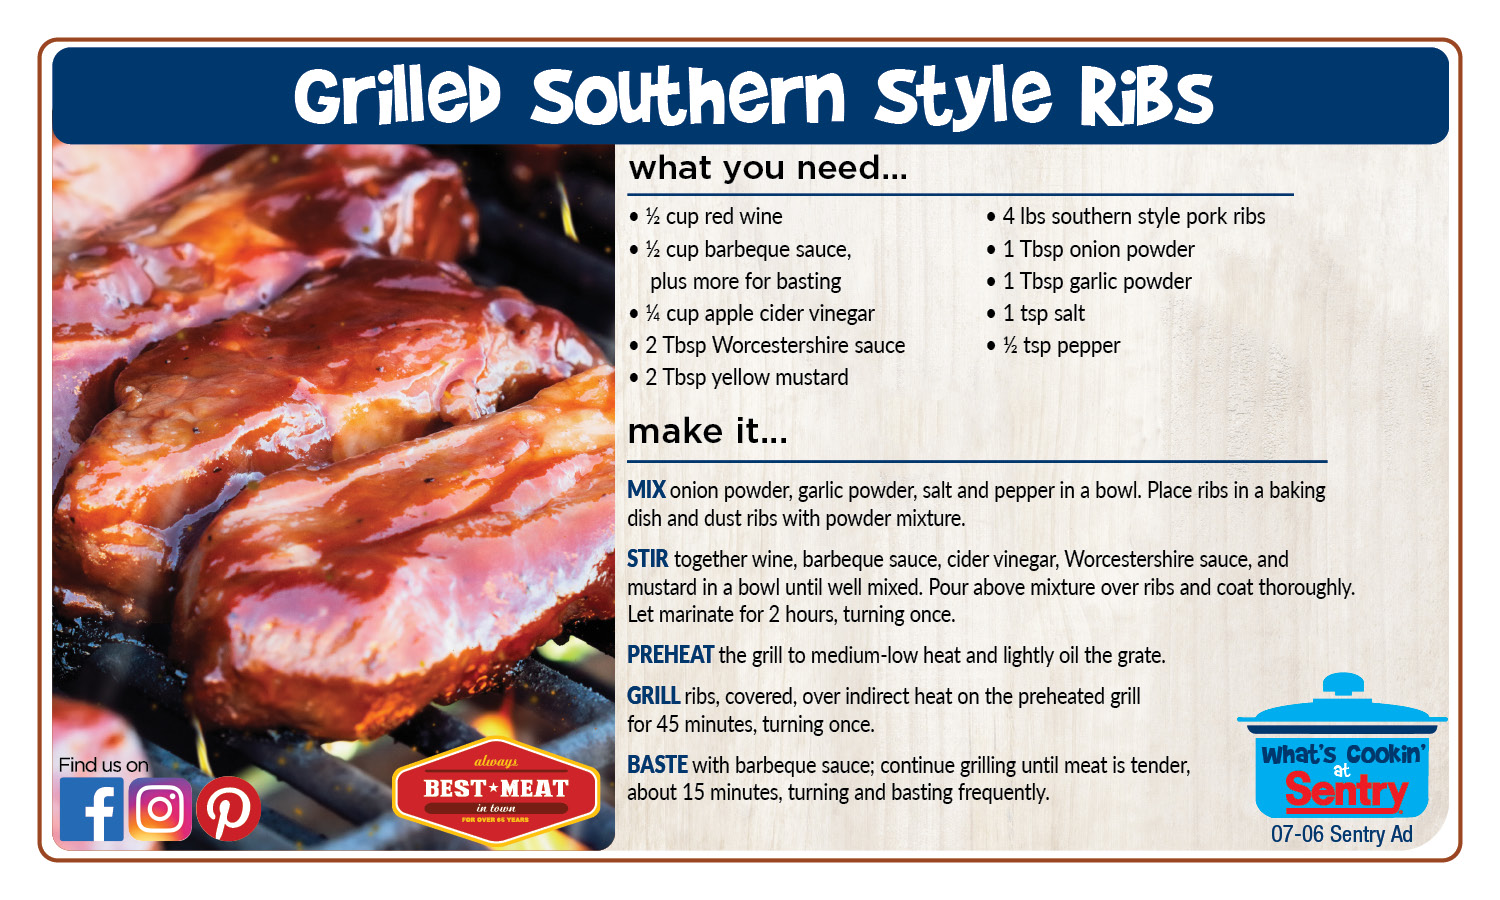 Grilled Southern Style Ribs